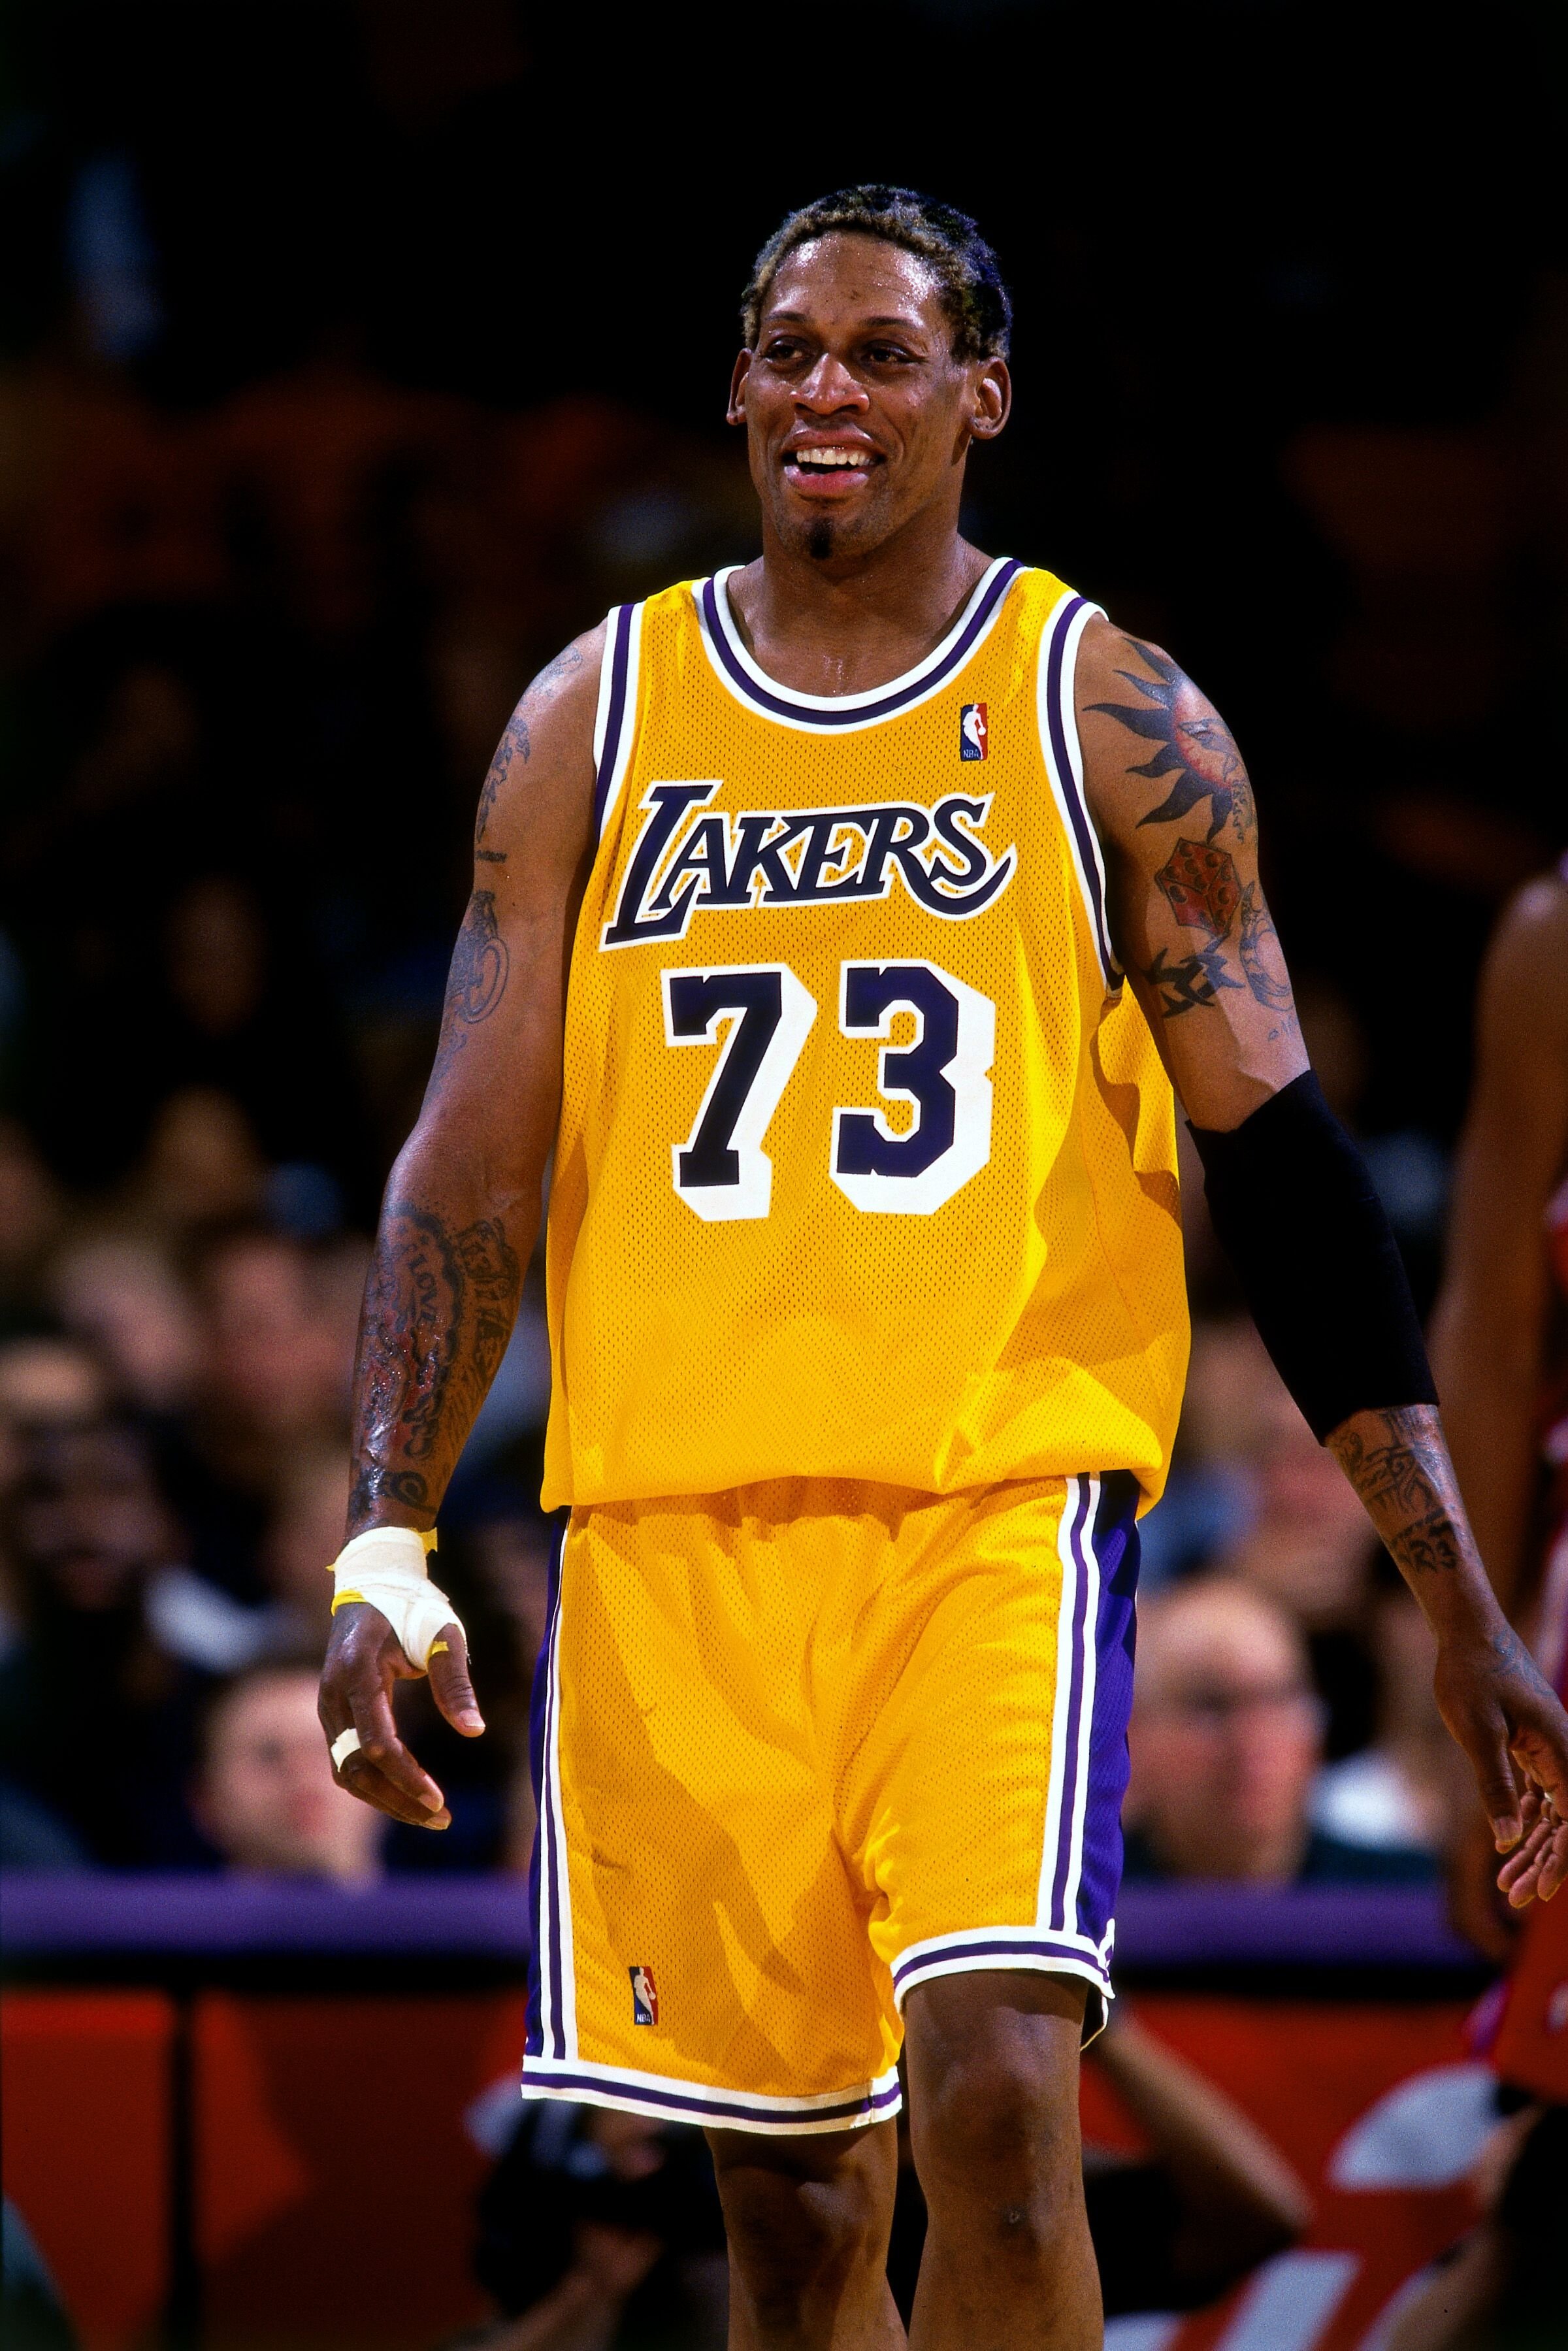 Dennis Rodman of the Los Angeles Lakers reacts to a play during a game in 1999 at Great Western Forum in Los Angeles, California. | Source: Getty Images